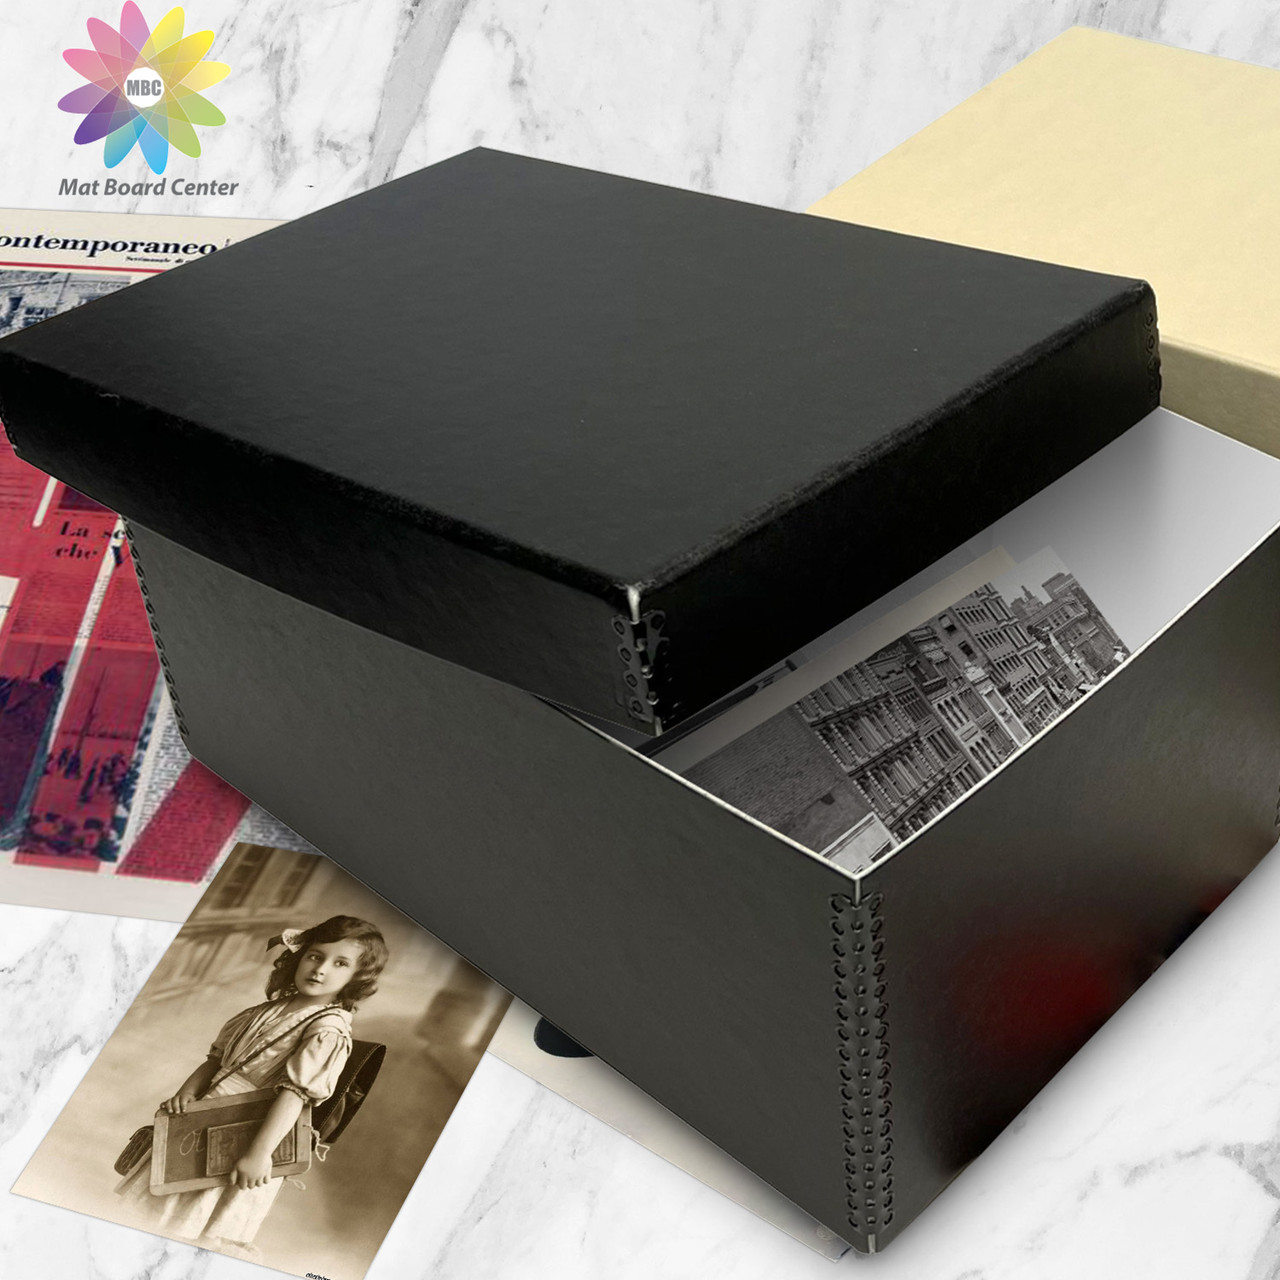 Lineco 12x7.75x5.5 Black Archival Photo Storage Box fits 5x7 Pictures  Container with